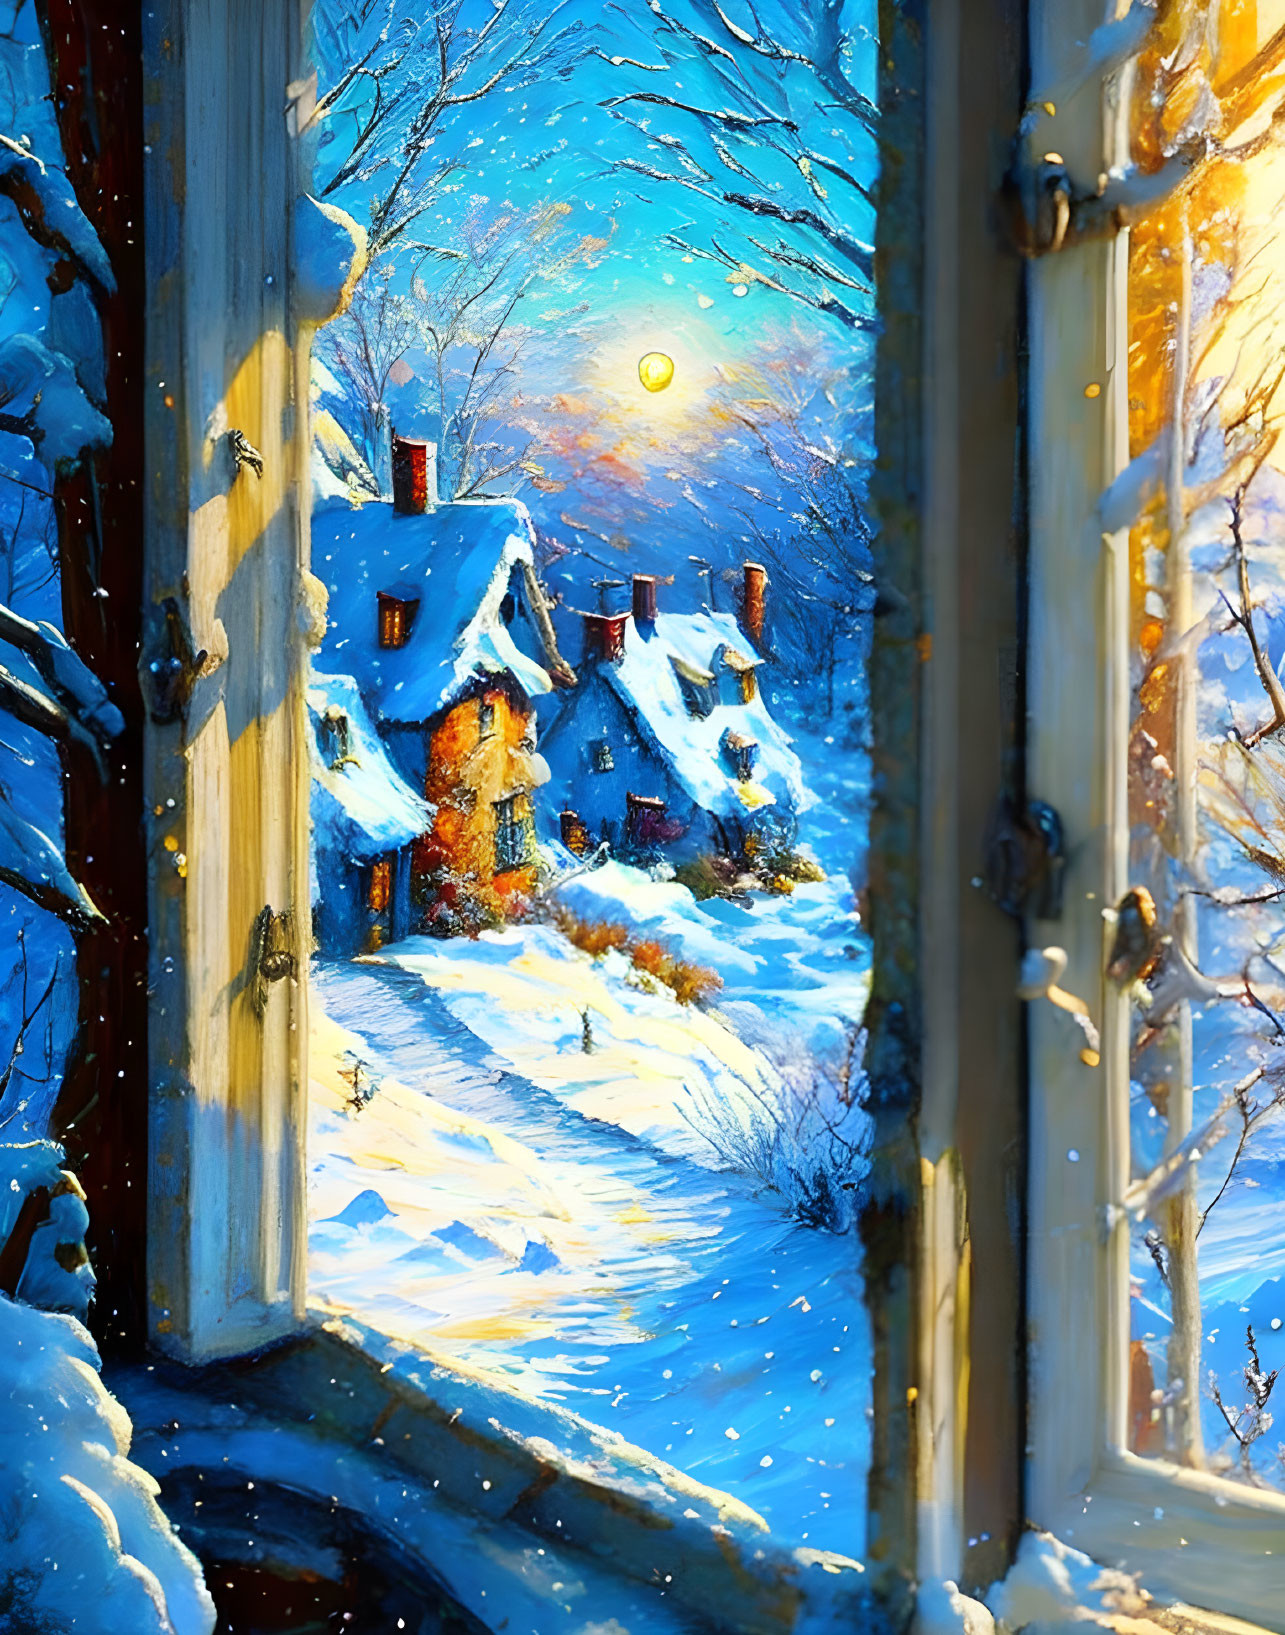 Snowy scene with cozy cottages and moonlit sky viewed through window